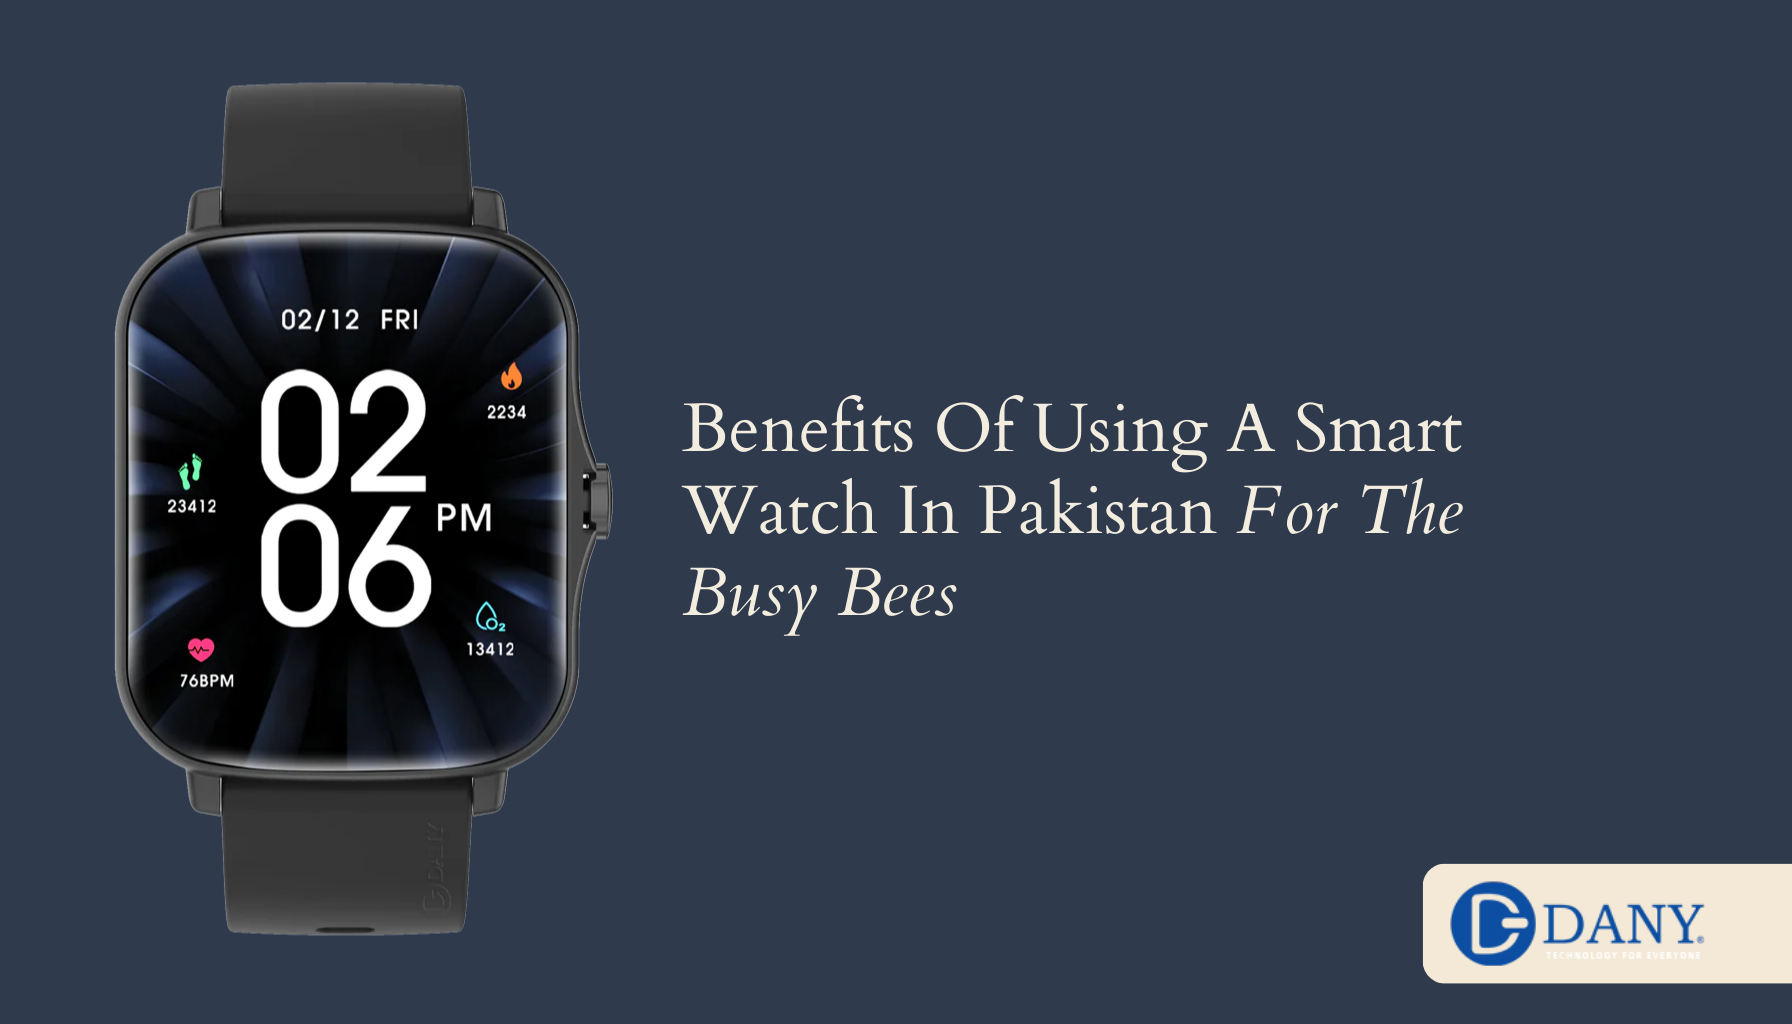 Benefits Of Using A Smart Watch In Pakistan For The Busy Bees